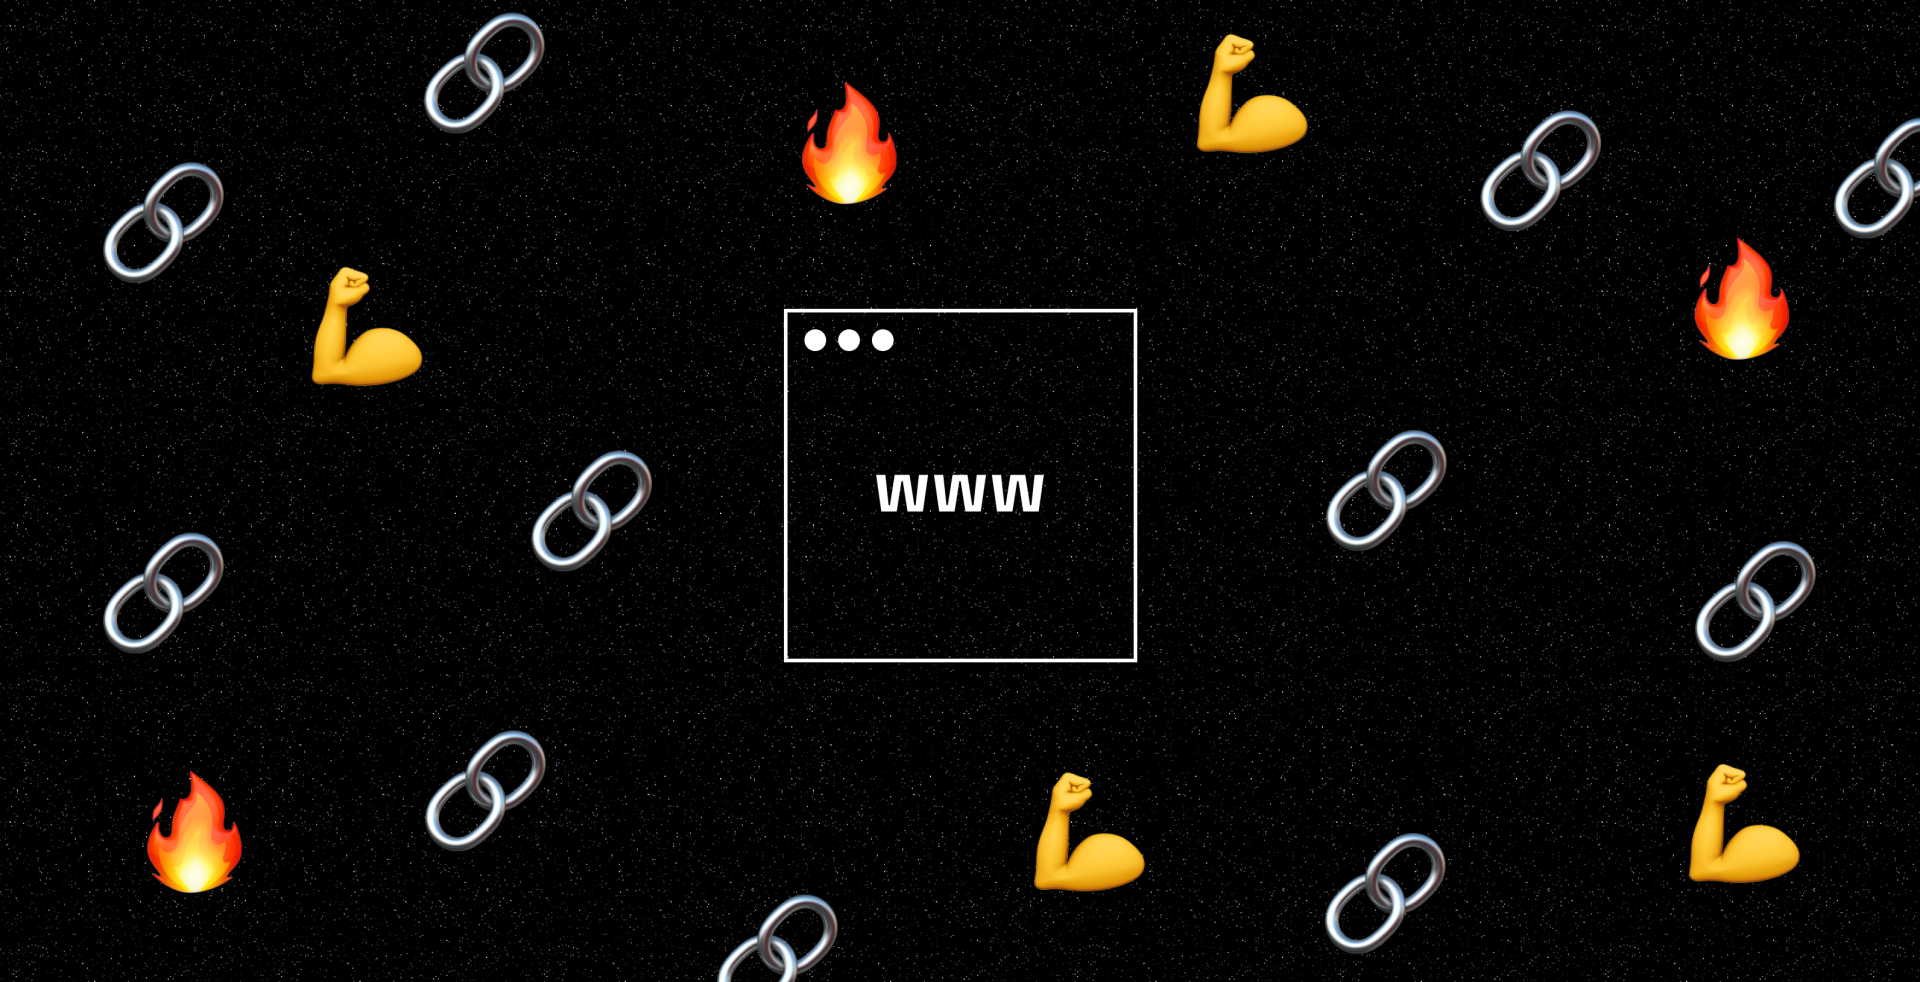 Patterned collage of links, biceps, and fire emojis on a black background